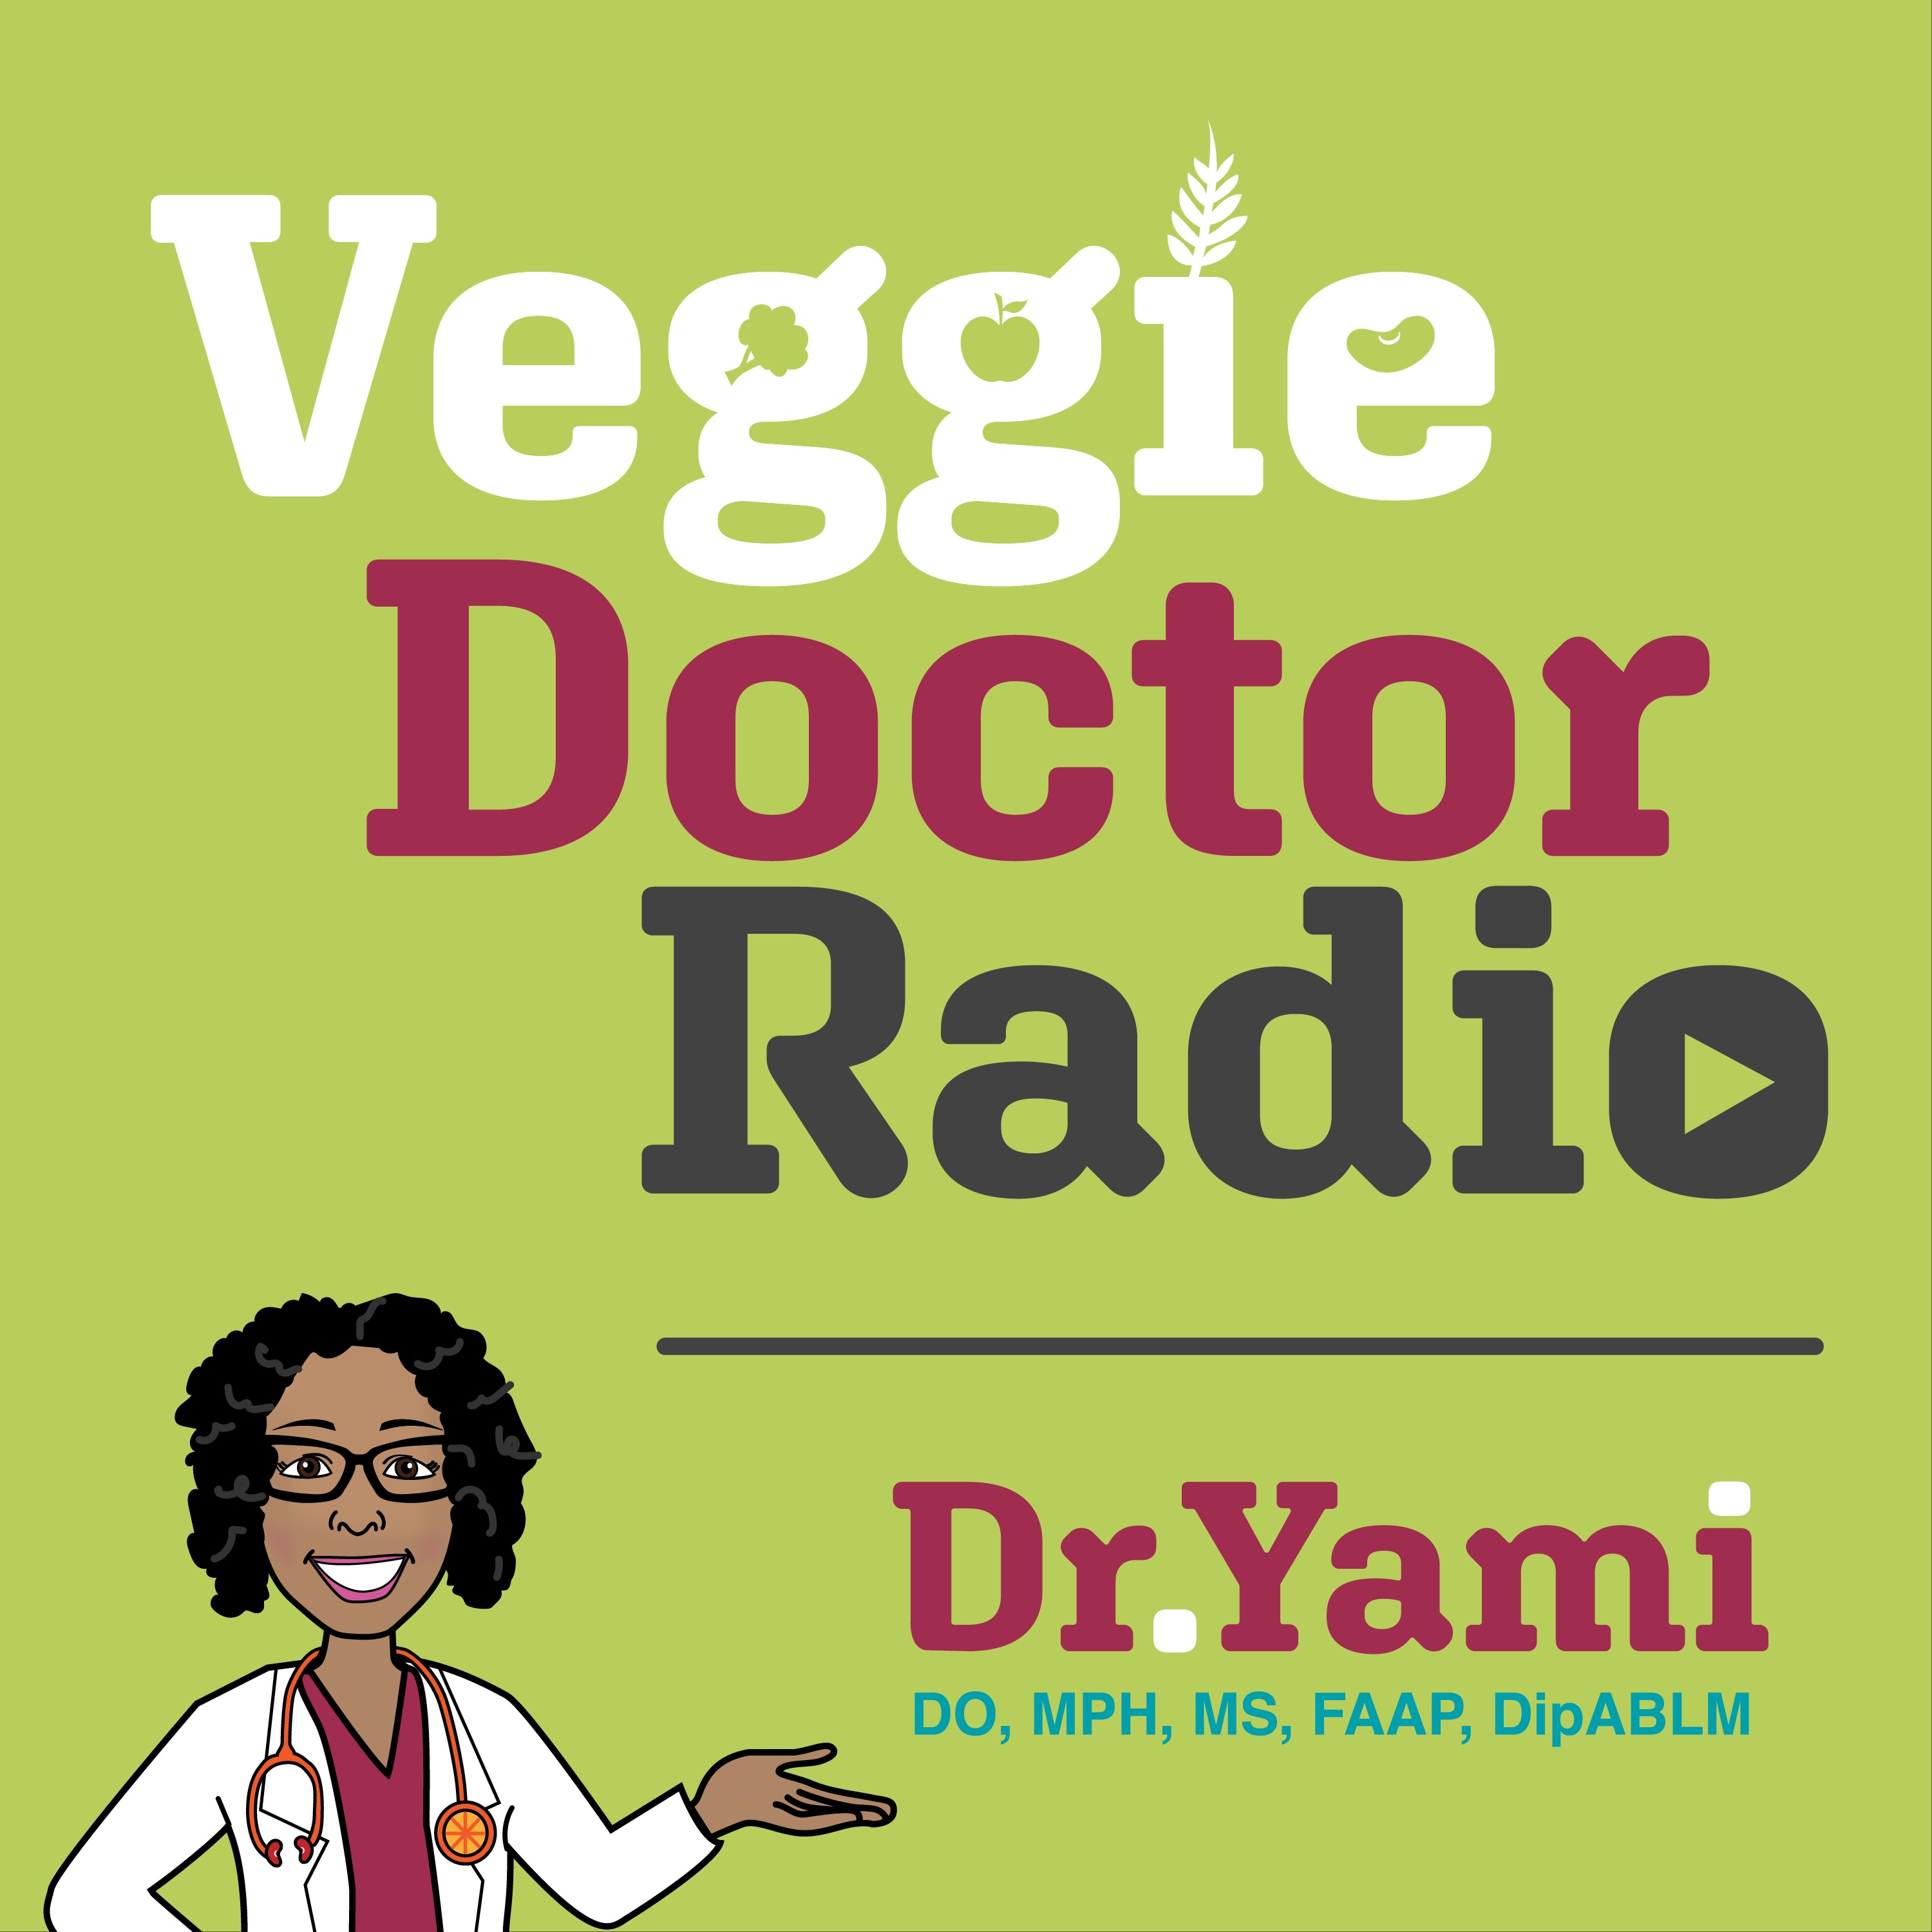 210: How to Travel the World as a Vegan with Brighde Reed (Veggie Doctor Radio)